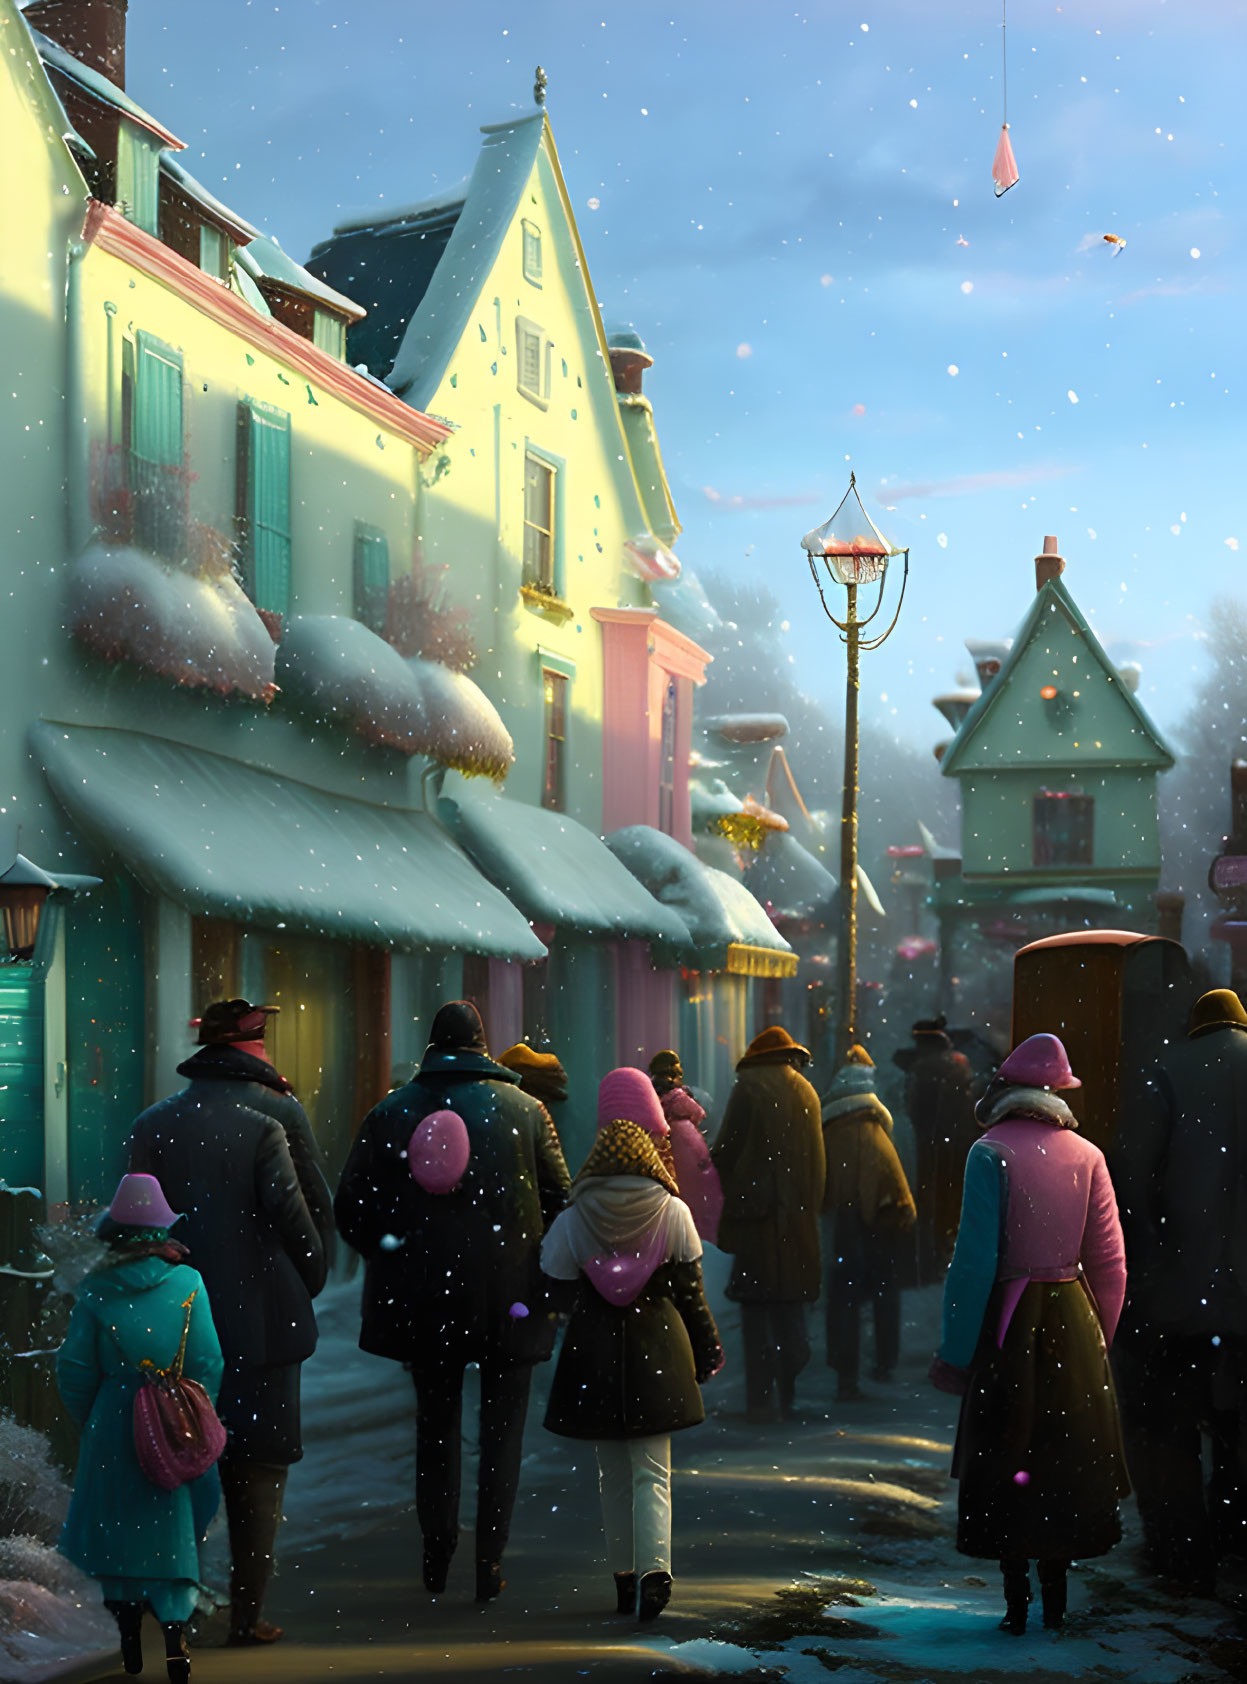 Snow-covered street scene with pedestrians, colorful houses, glowing streetlamp, and gentle snowfall.